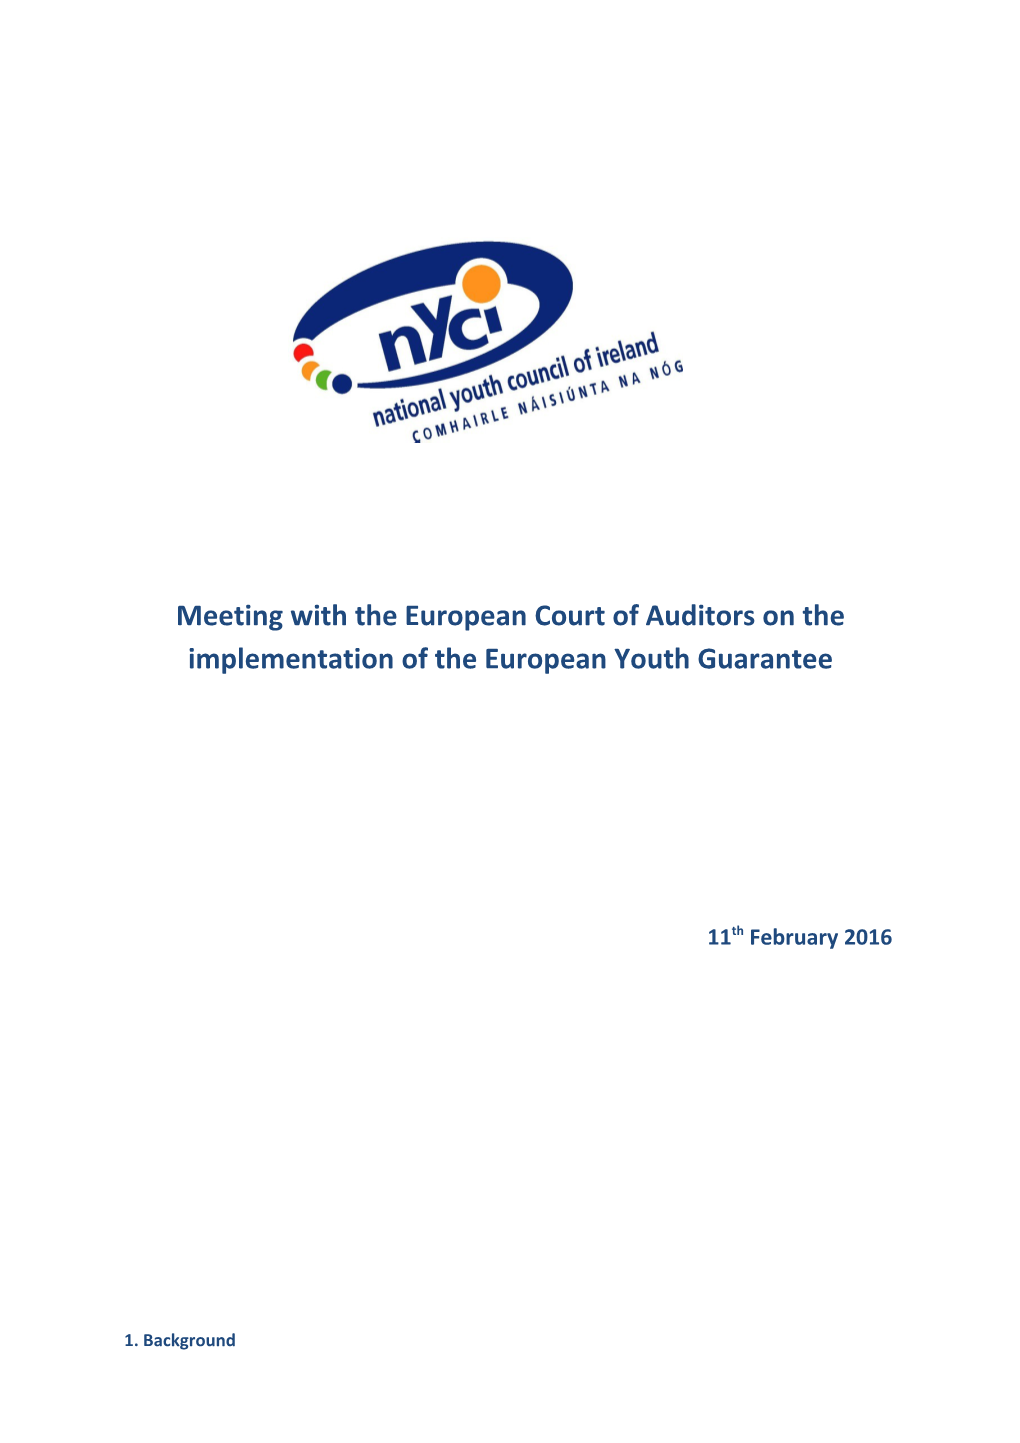 Meeting with the European Court of Auditors on the Implementation of the European Youth